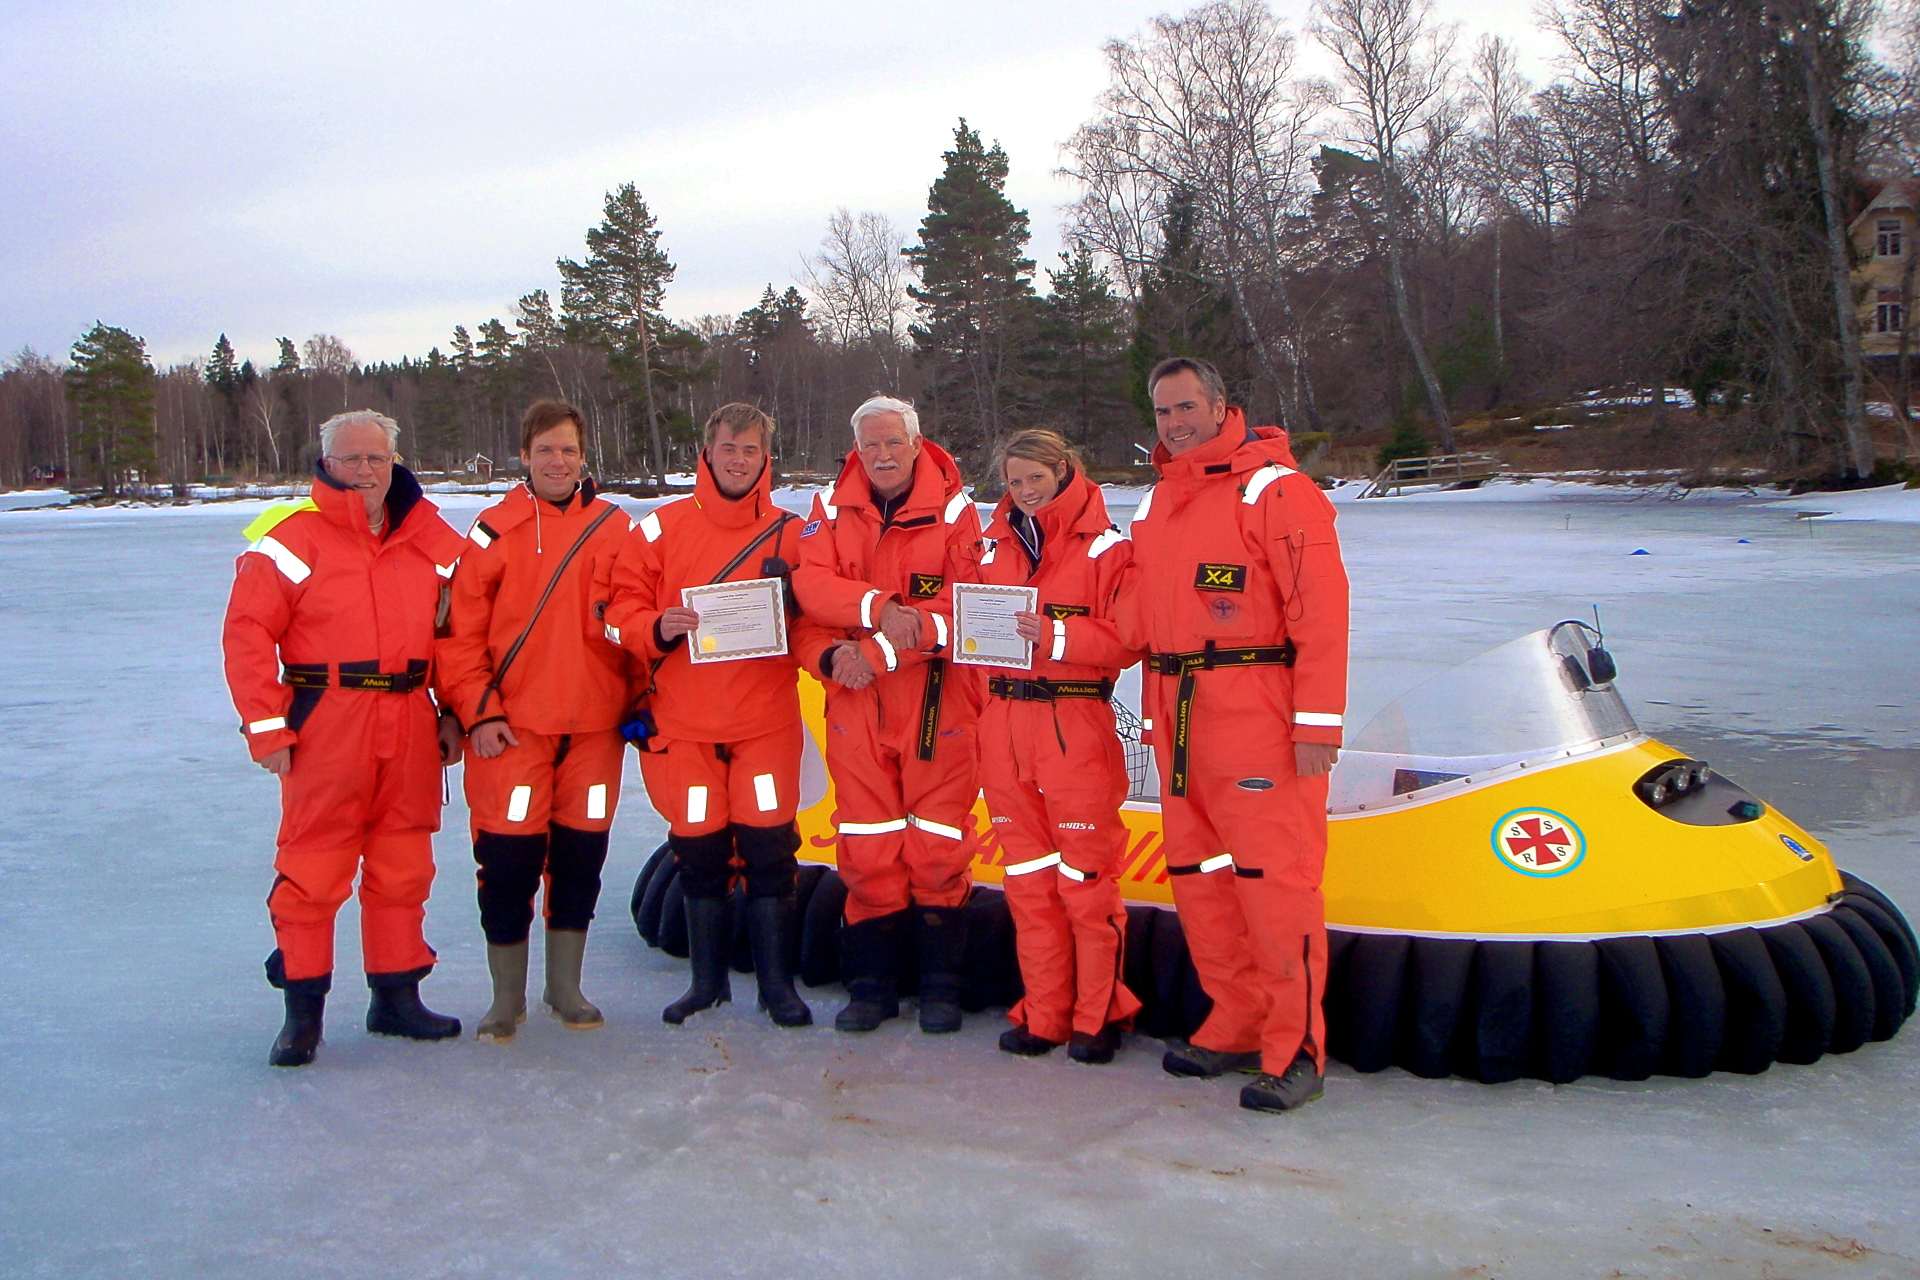 Fleet of 4 passenger Neoteric Craft operated by Swedish Sea Rescue Society